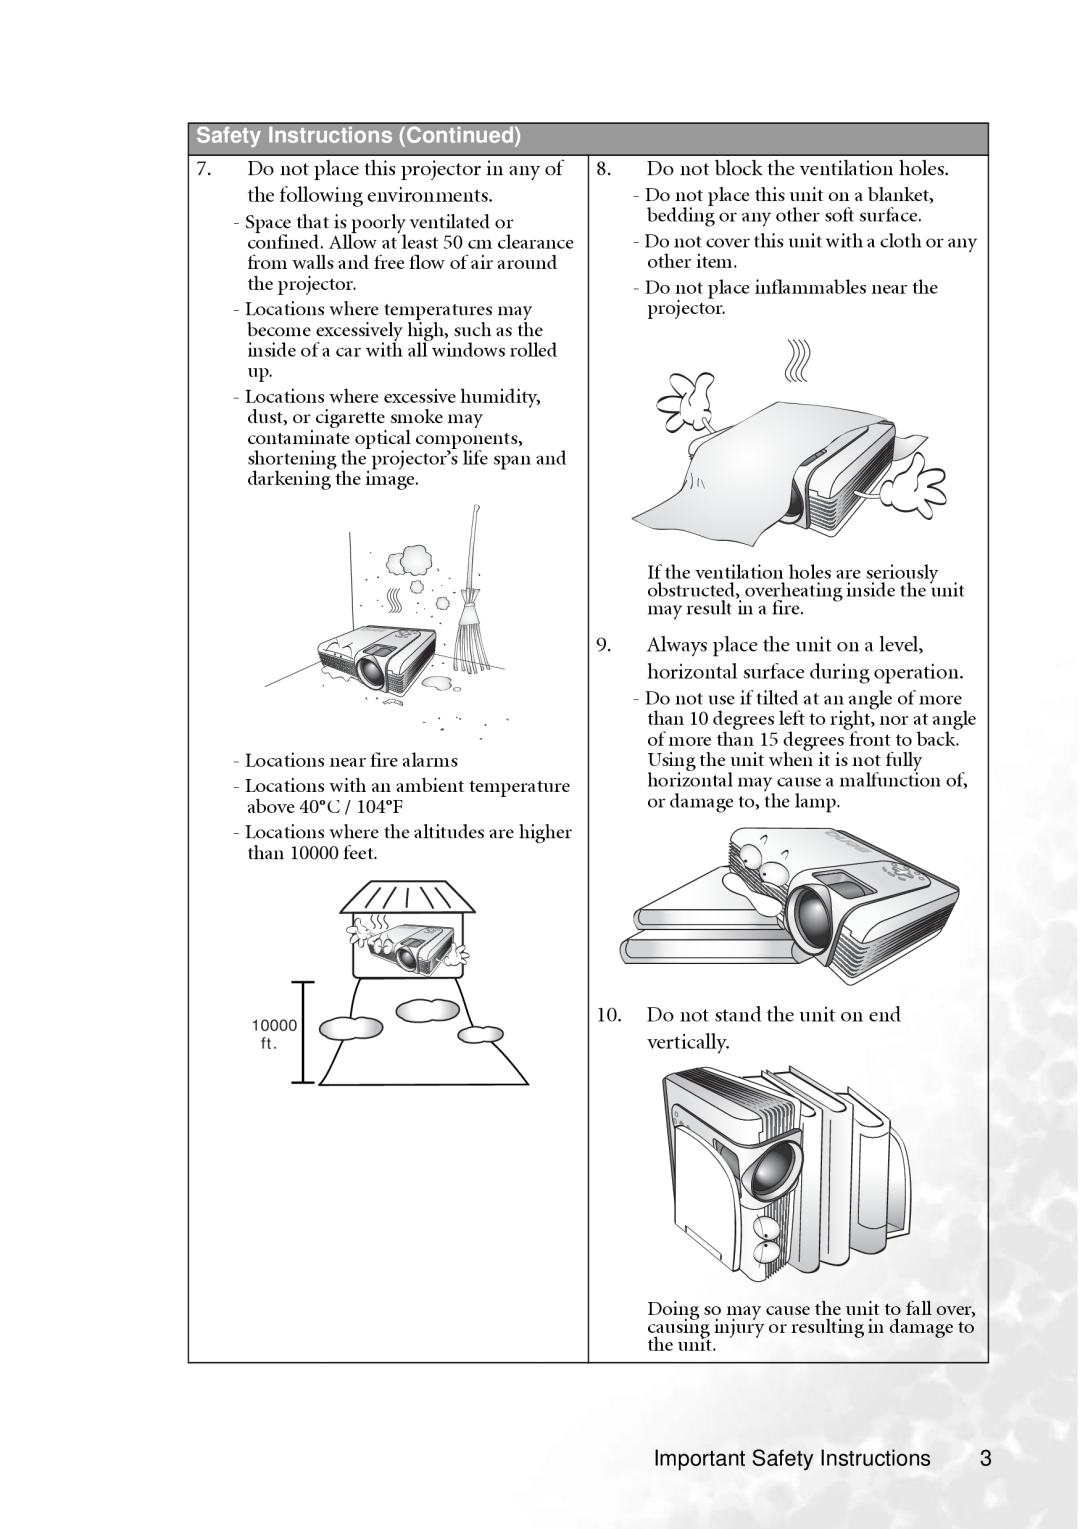 BenQ PB8250, PB8240 user manual Safety Instructions Continued, 10000 ft 